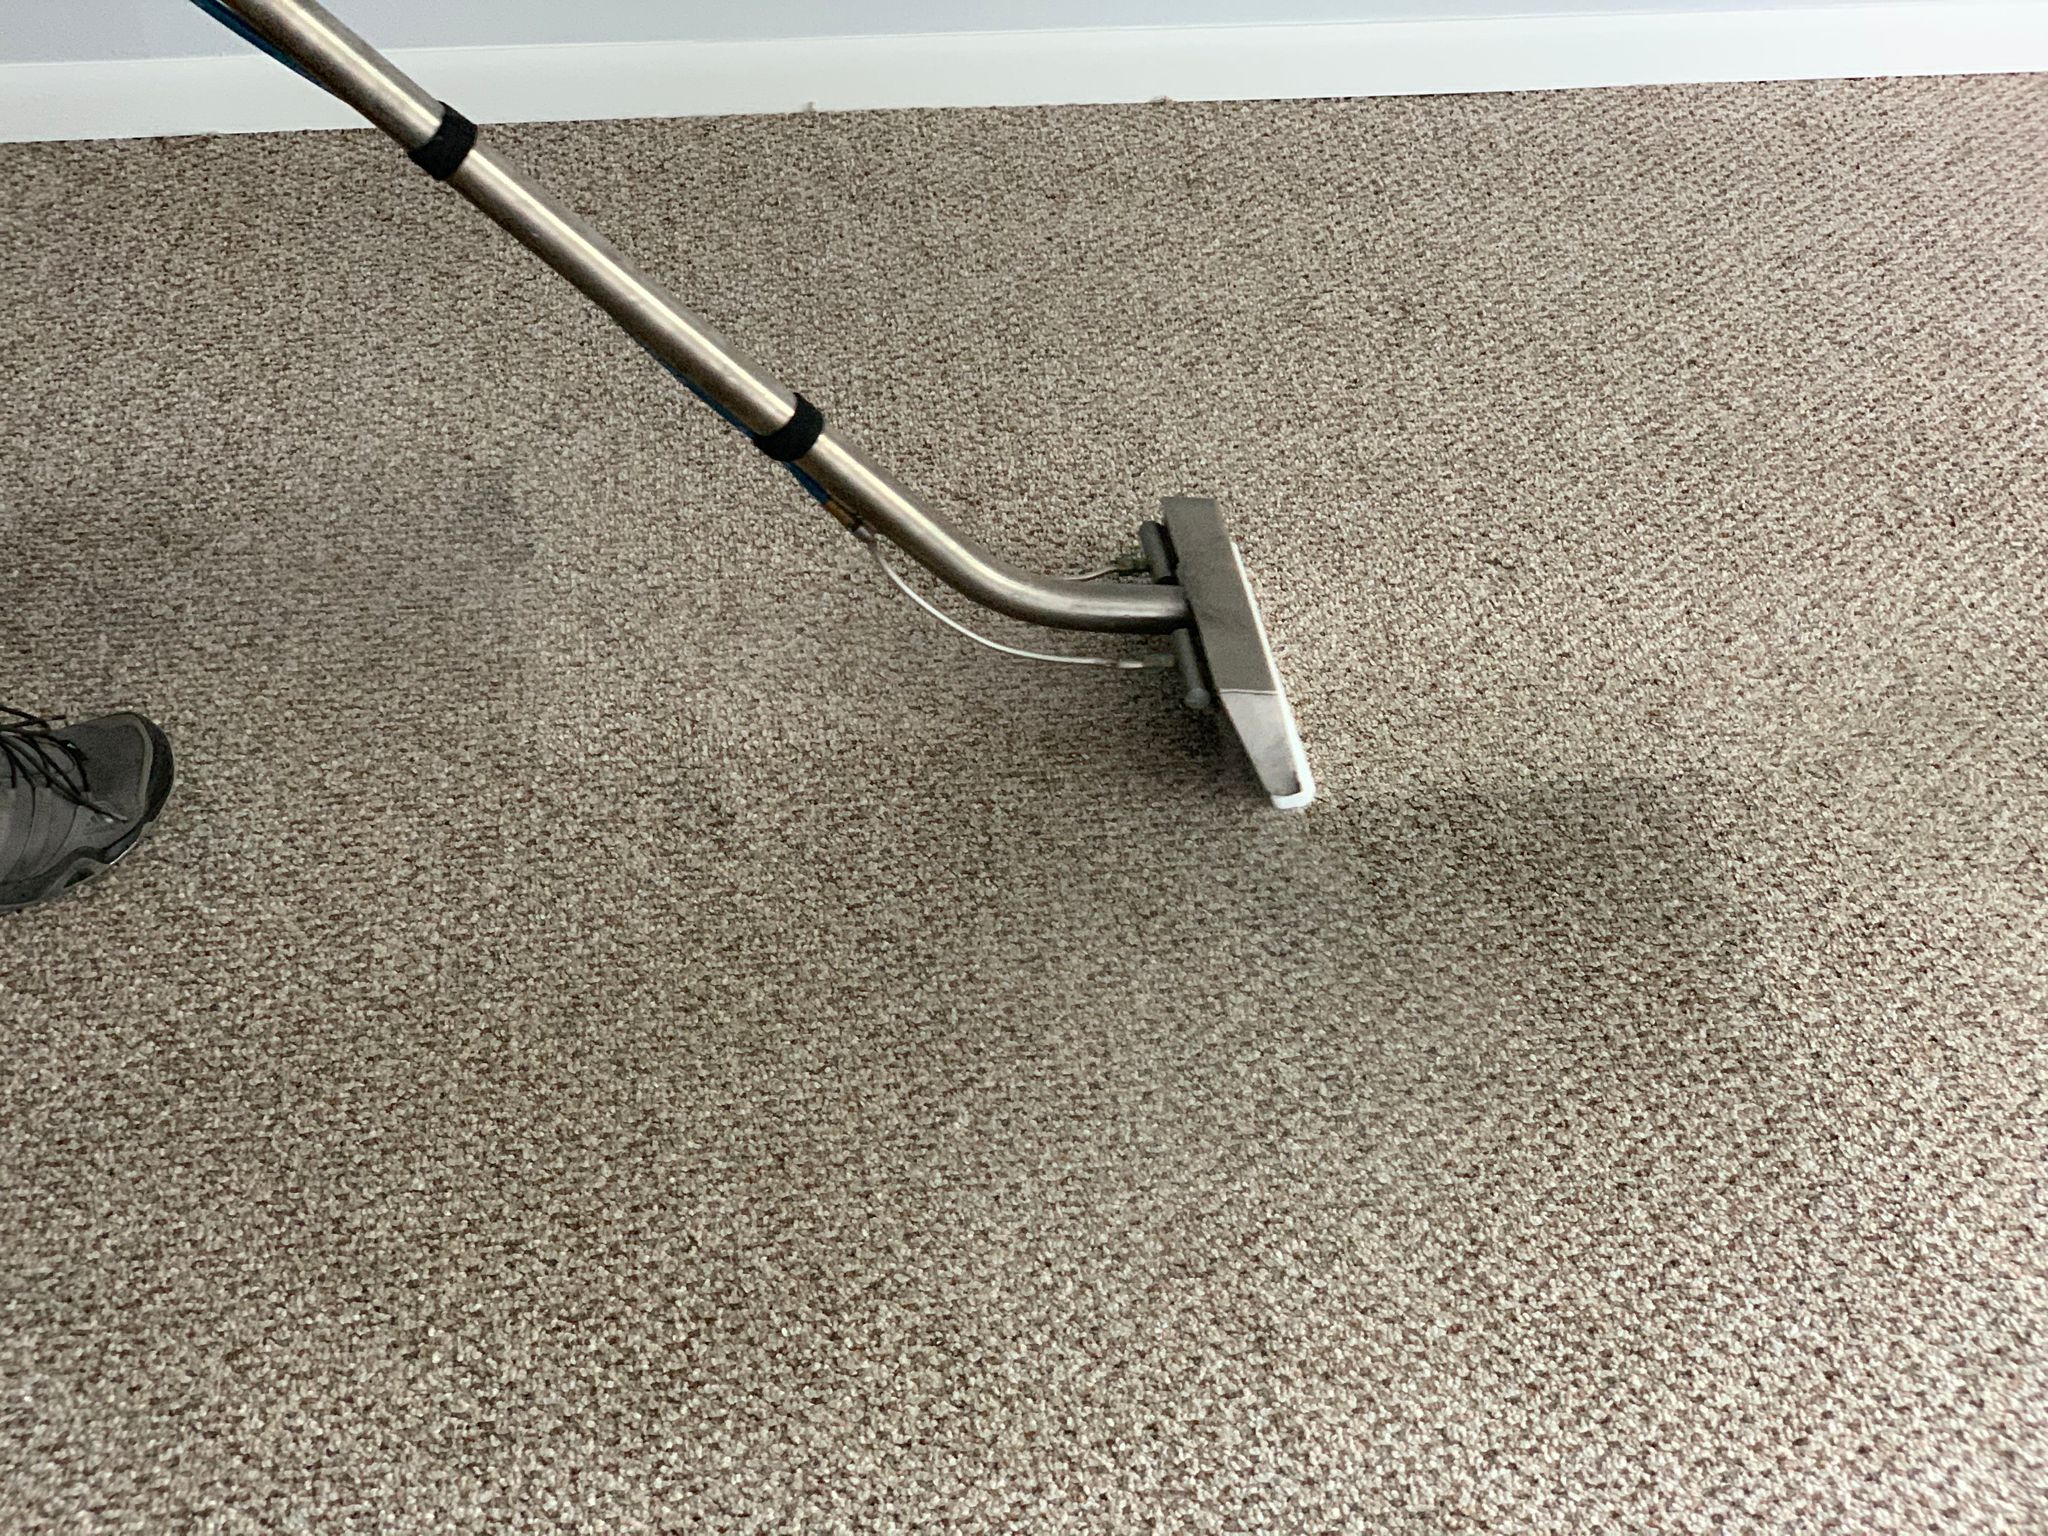 How Often Should a Business Have the Carpets Cleaned